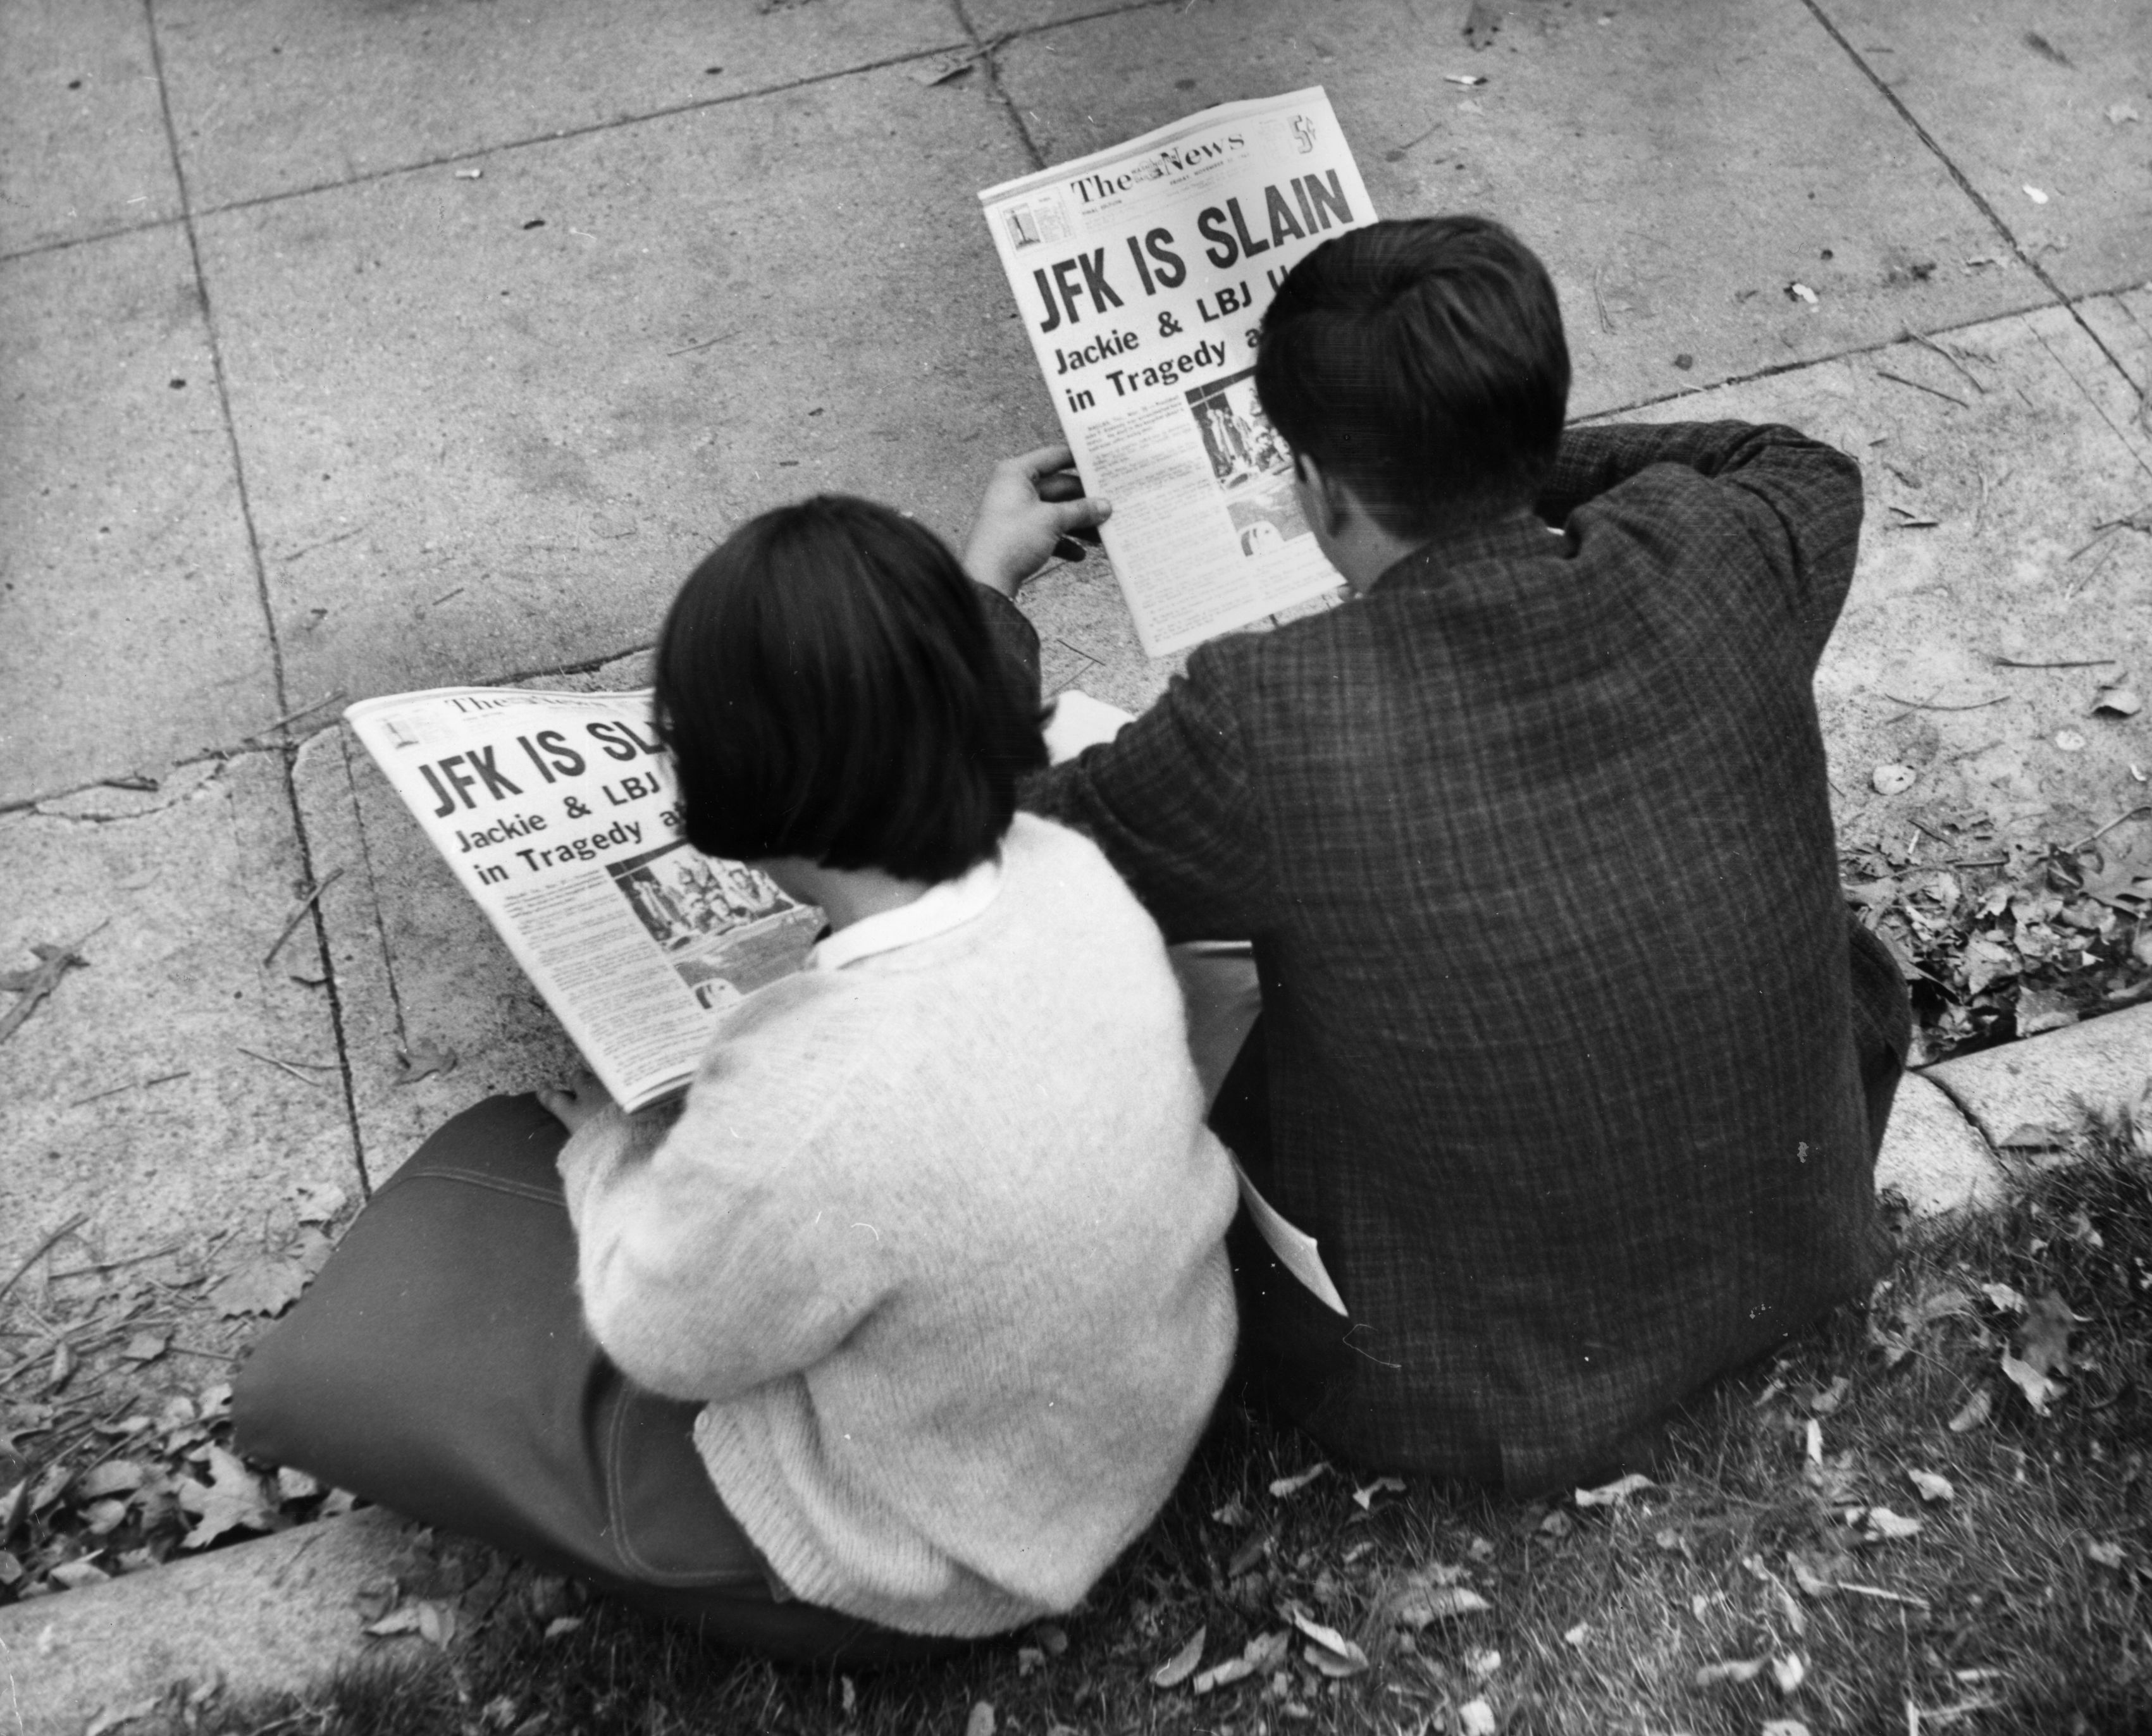 Two people sit in Lafayette Park in Washington, D.C. on Nov. 25, 1963 reading the newspaper reports of President John F. Kennedy's assassination. (credit: Keystone/Getty Images)